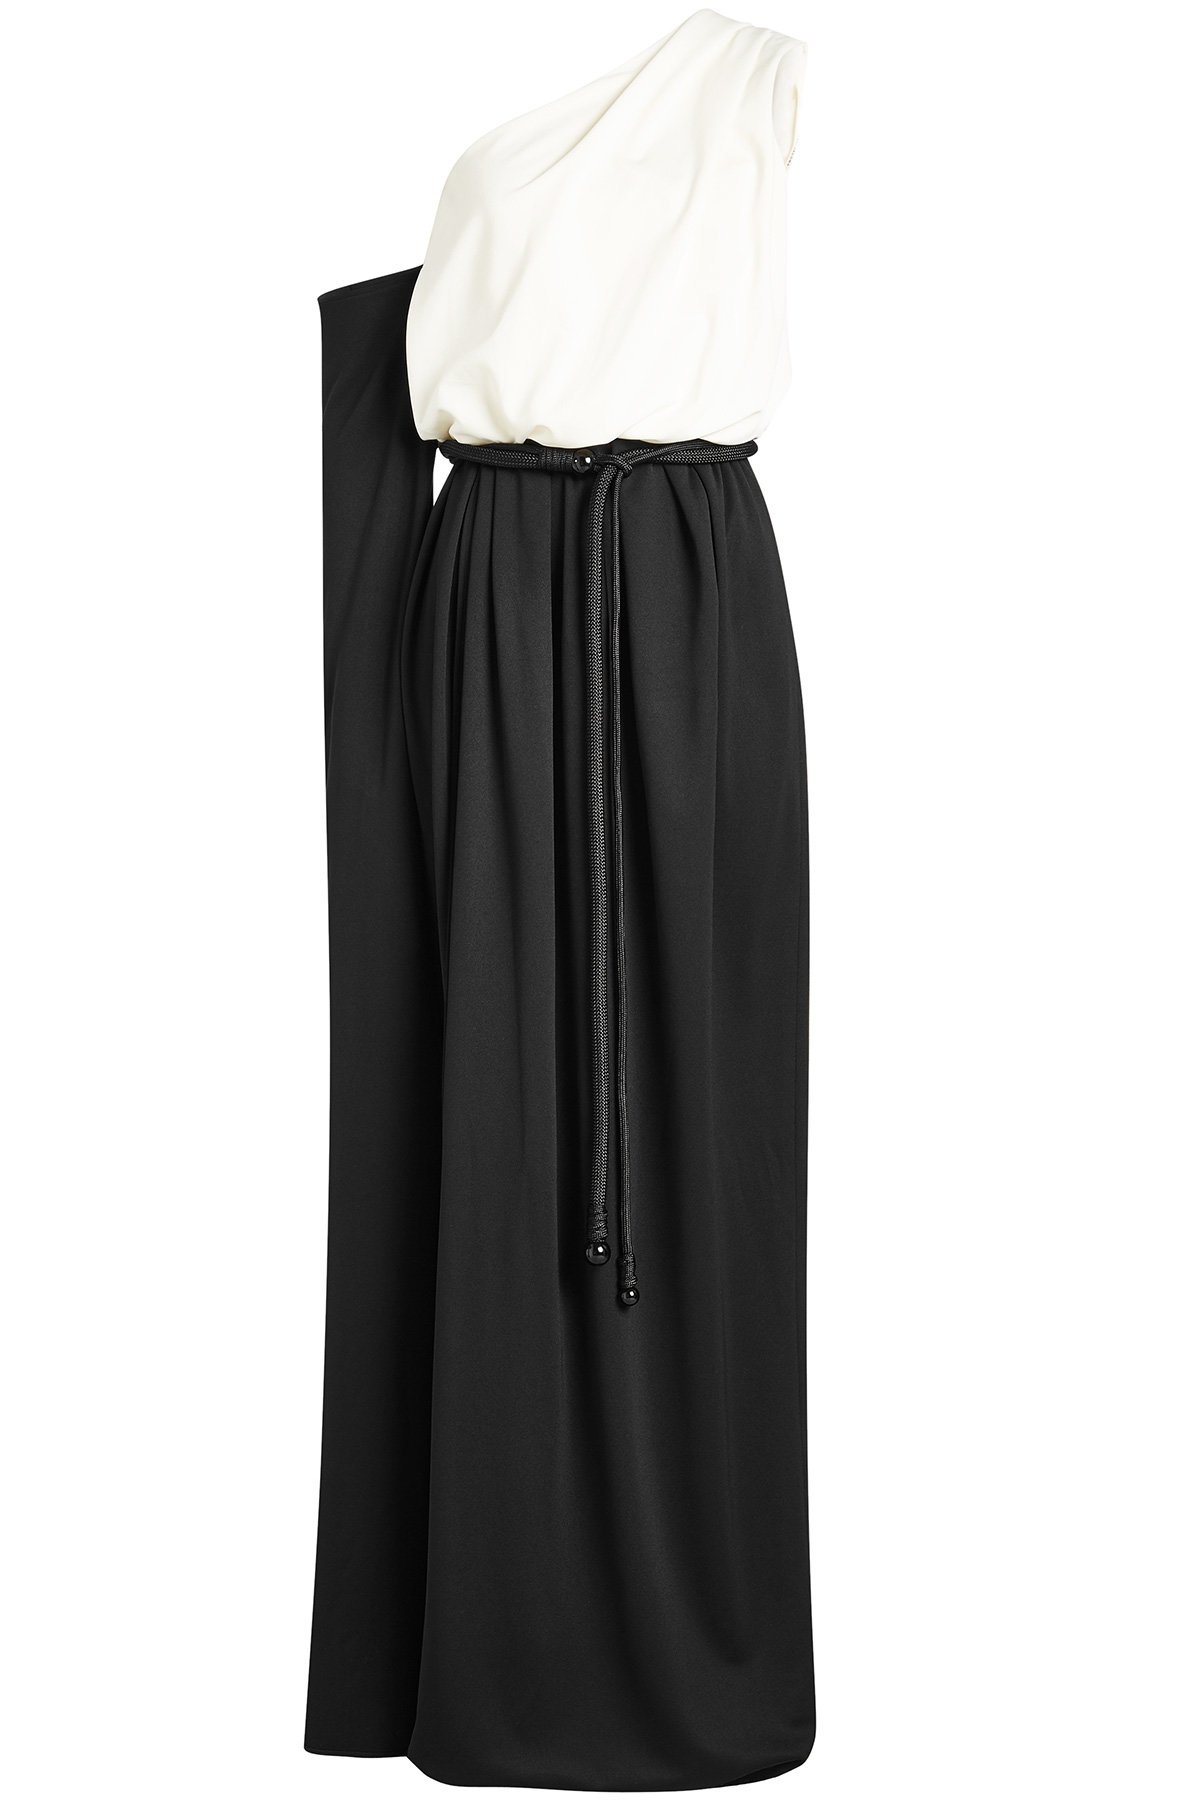 Asymmetric Gown by Marc Jacobs